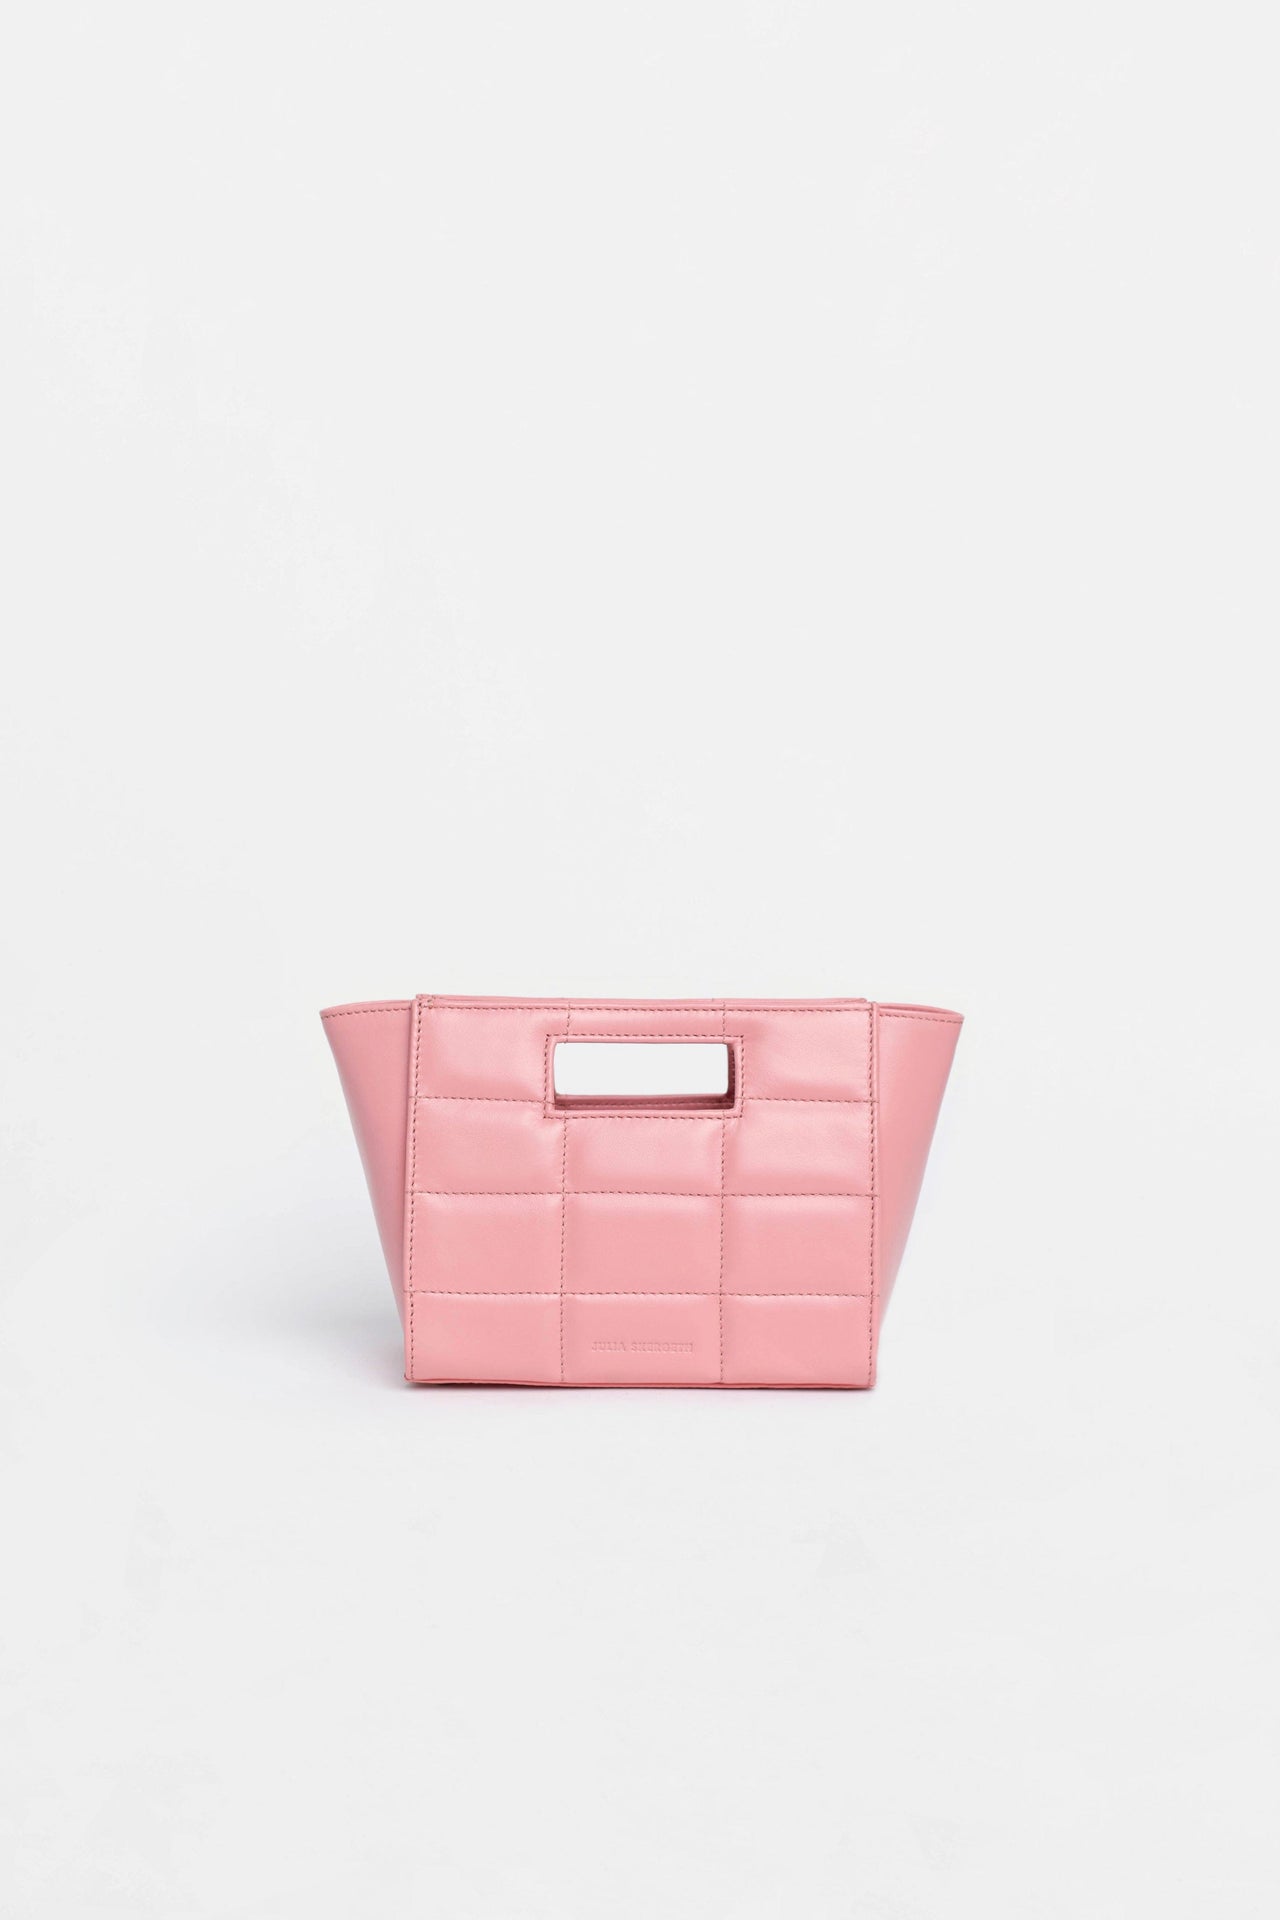 The QUILTED BAG MINI Peony - JULIA SKERGETH